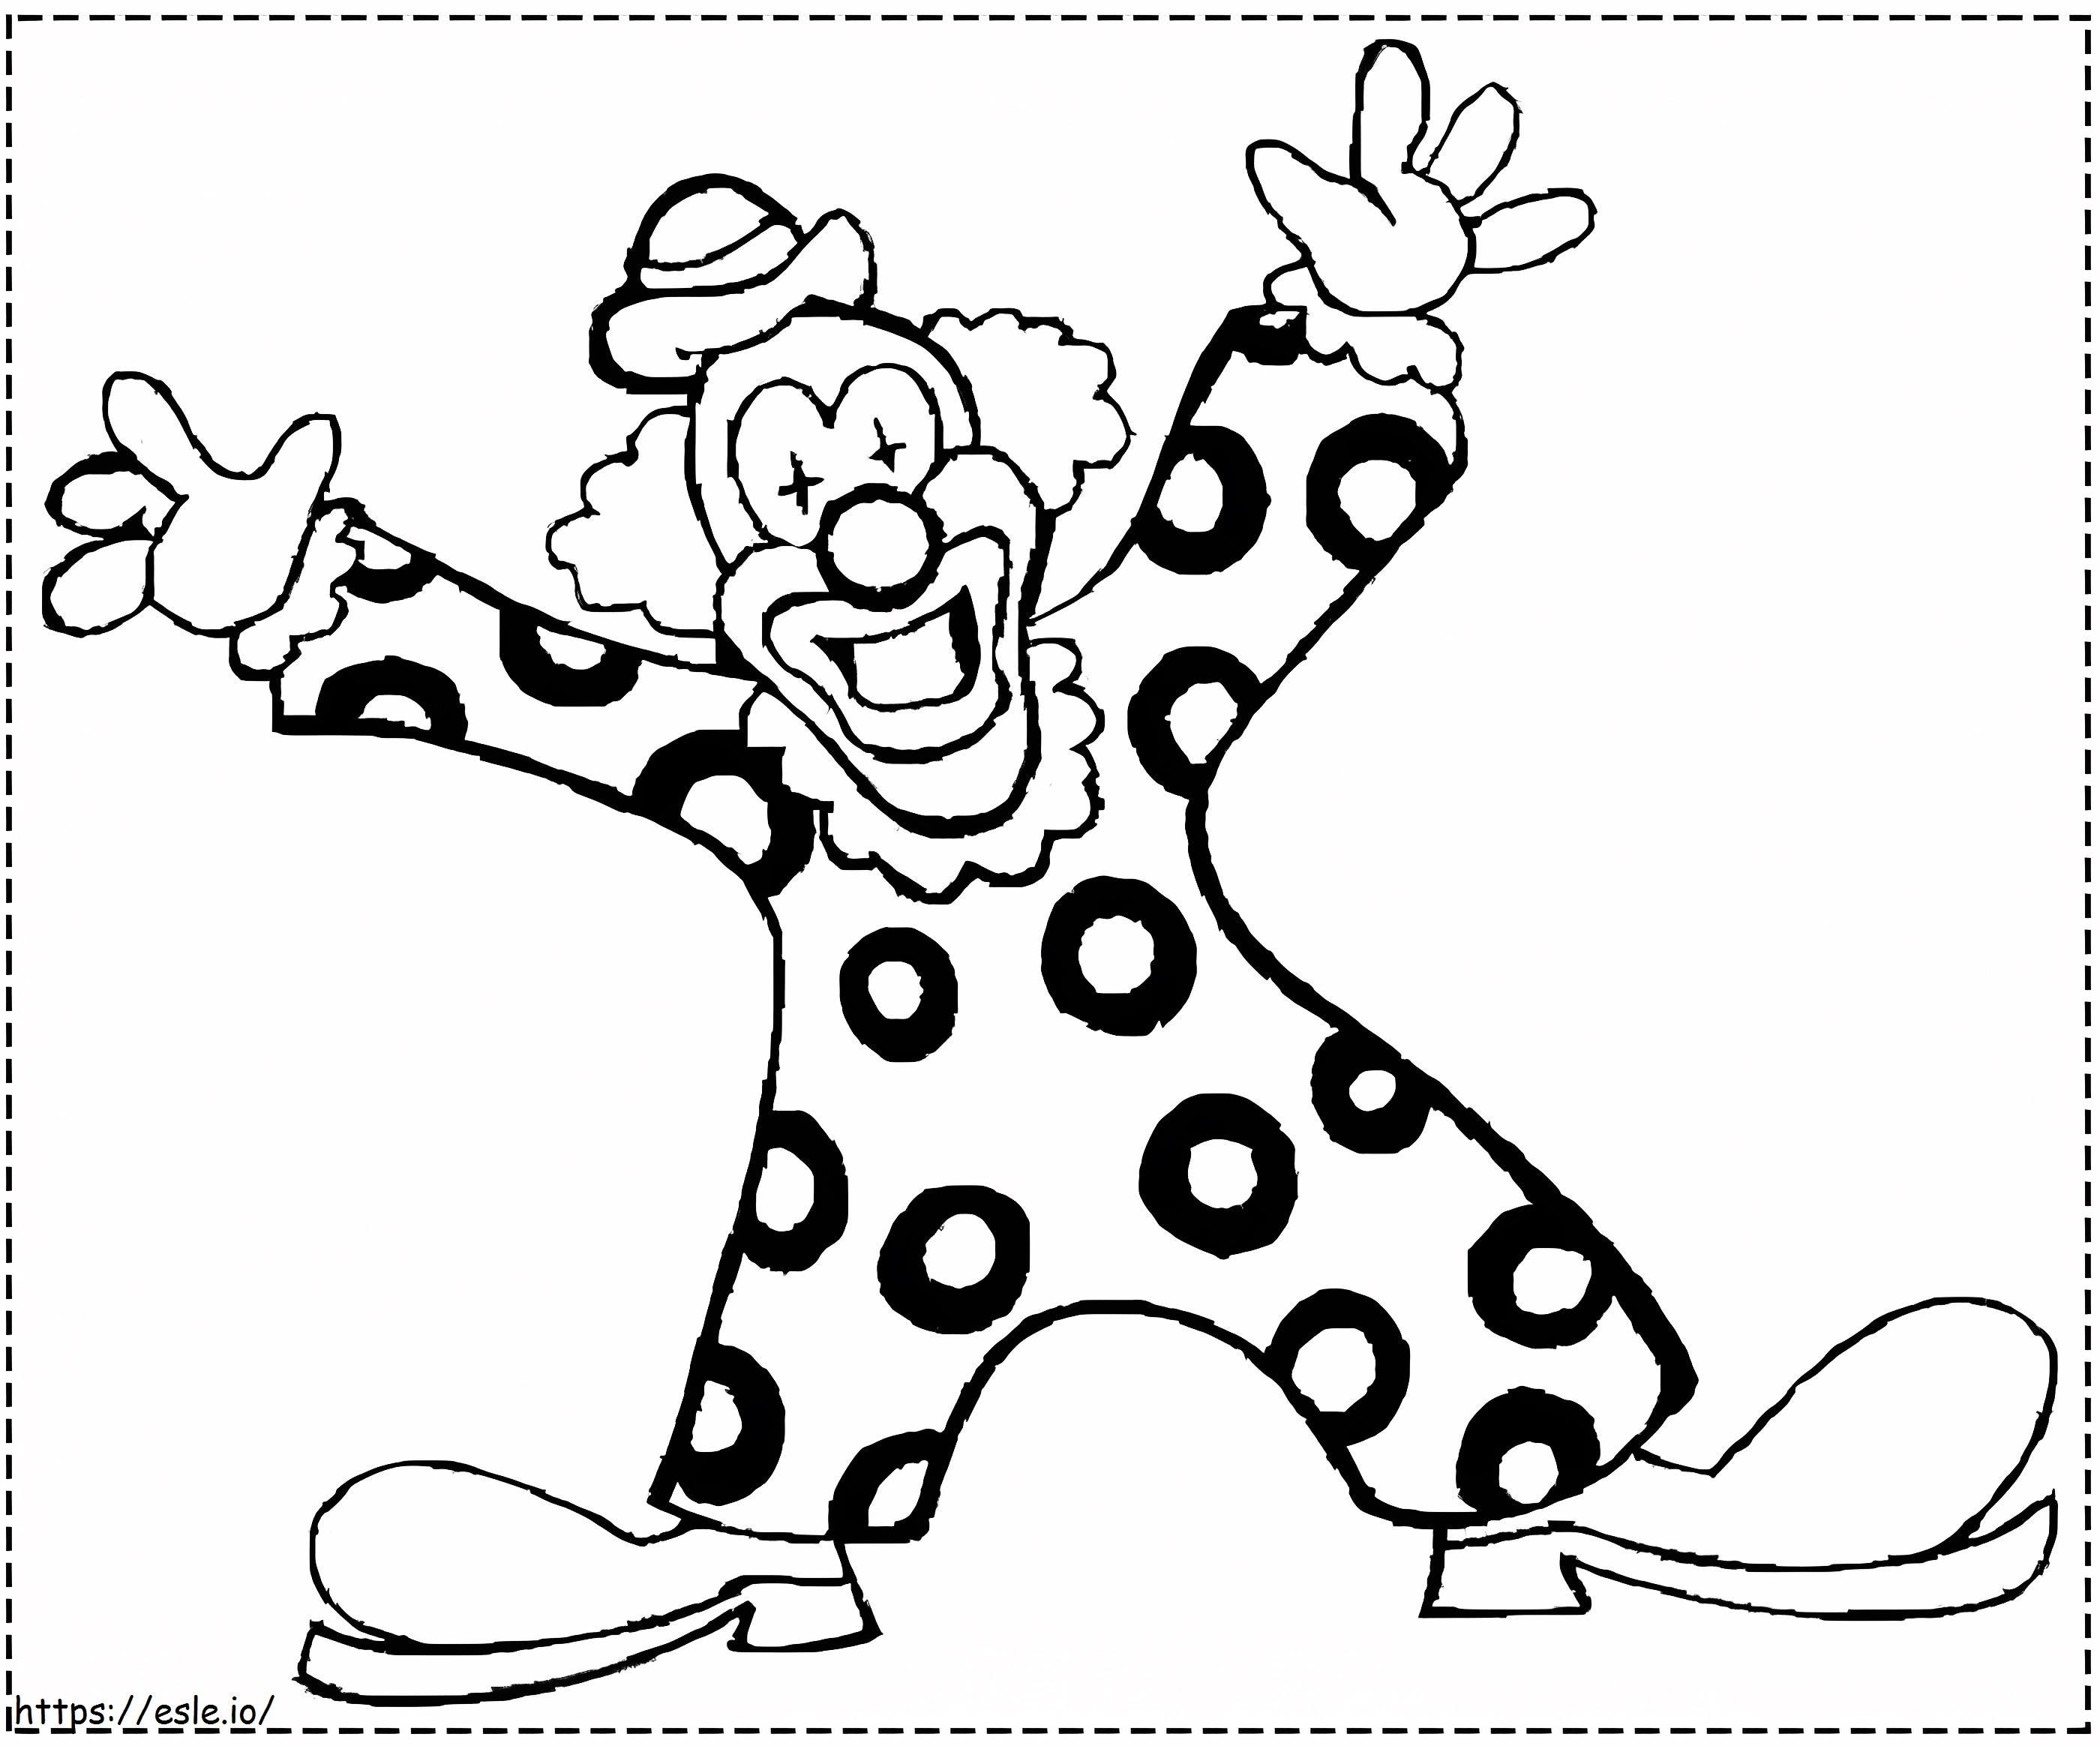 Old Clown coloring page